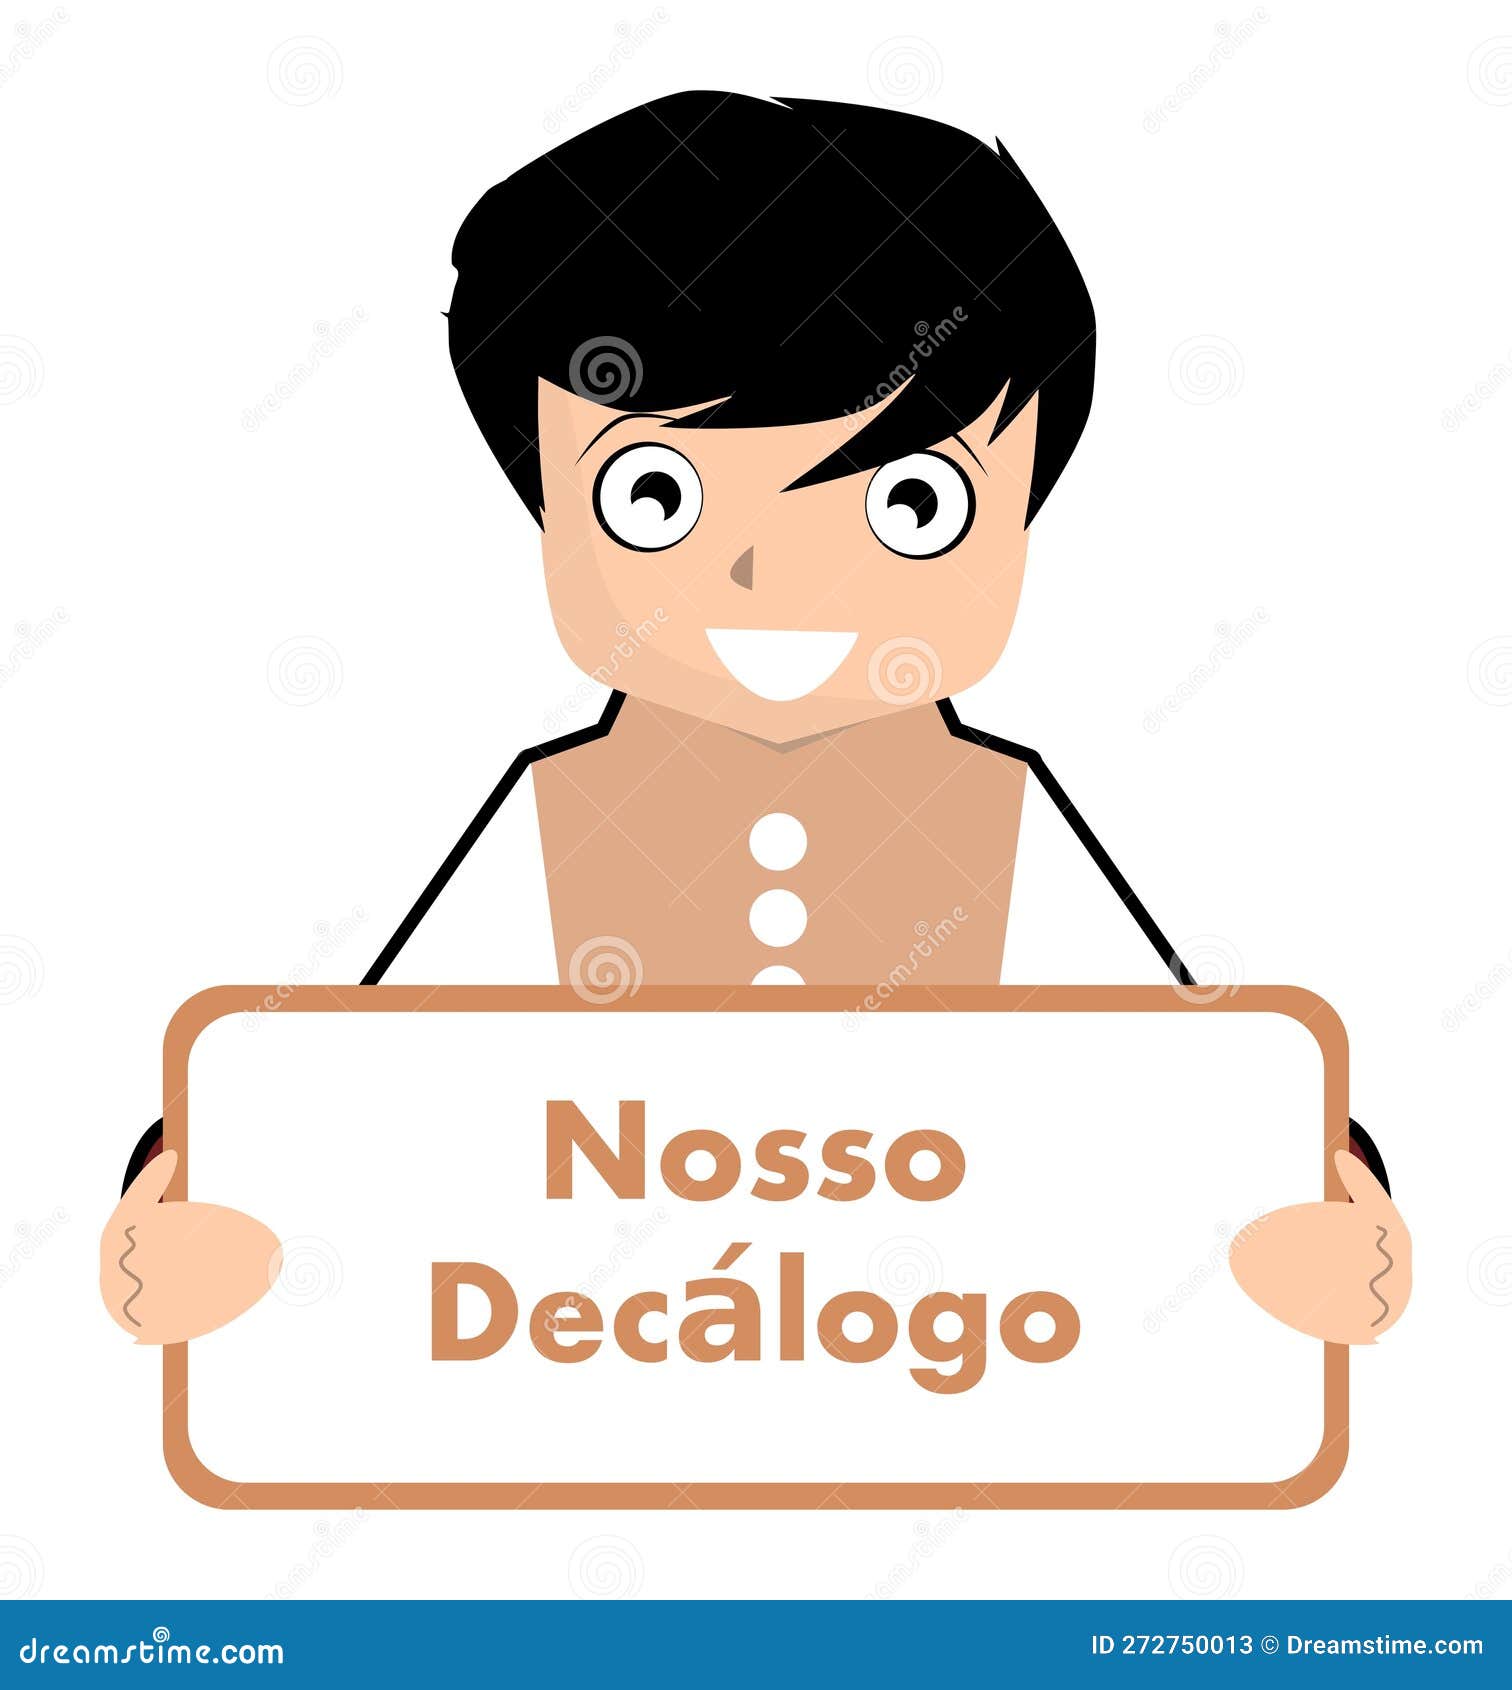 boy with our decalogue sign, portuguese, rules, .